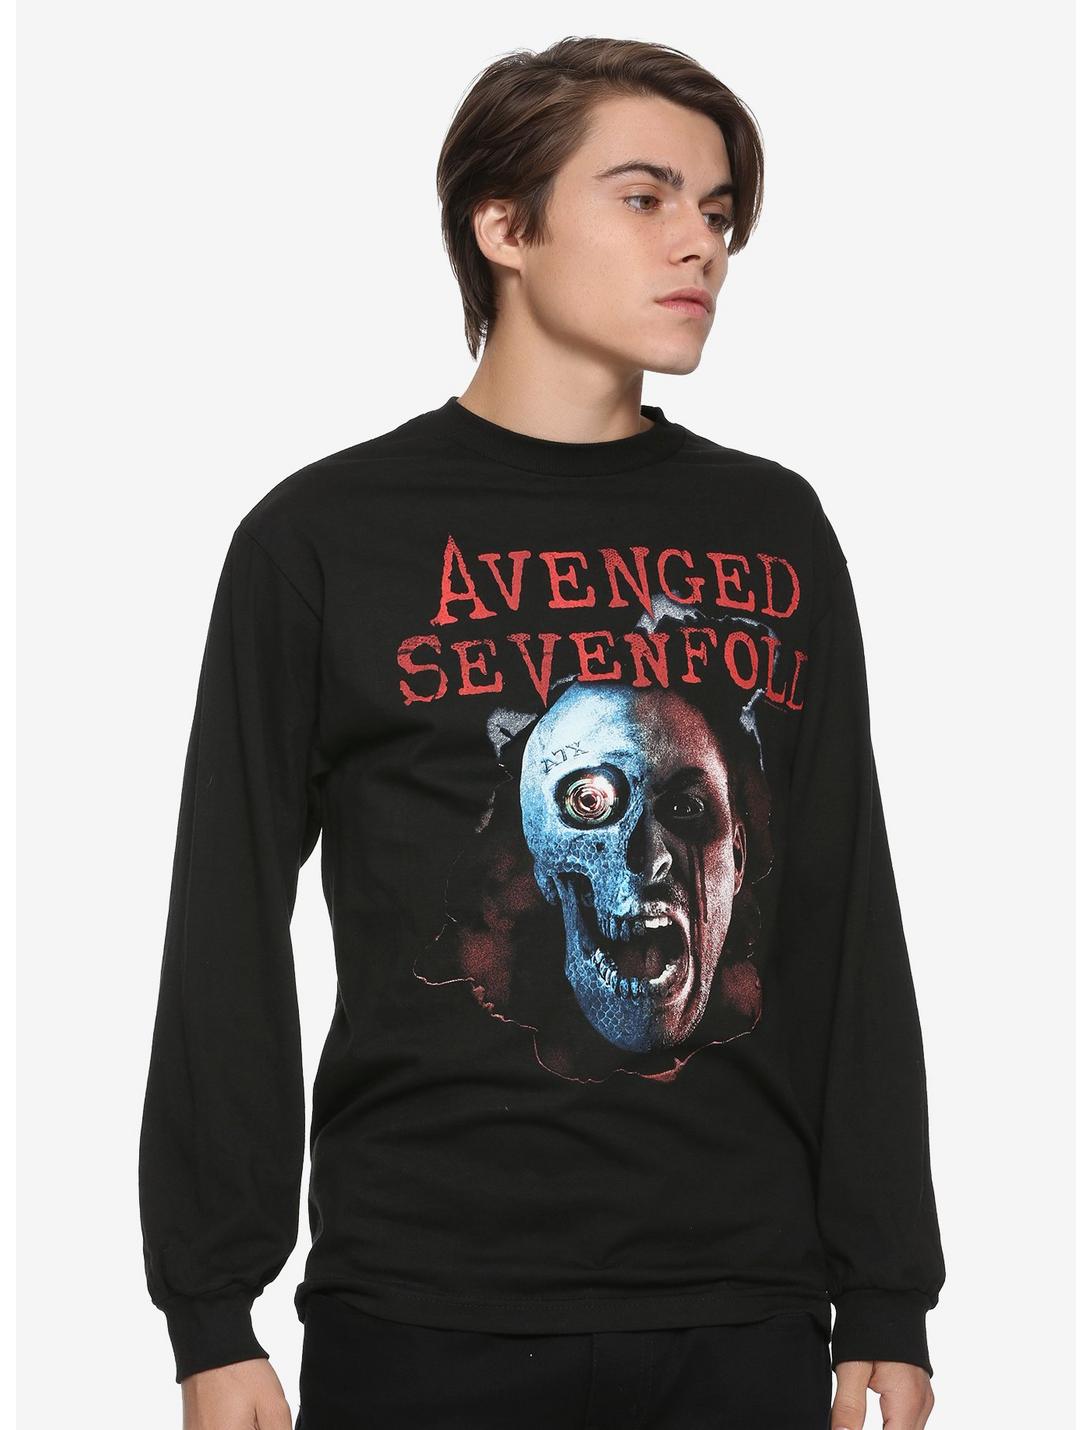 Avenged Sevenfold Two Faced Long-Sleeve T-Shirt, BLACK, hi-res